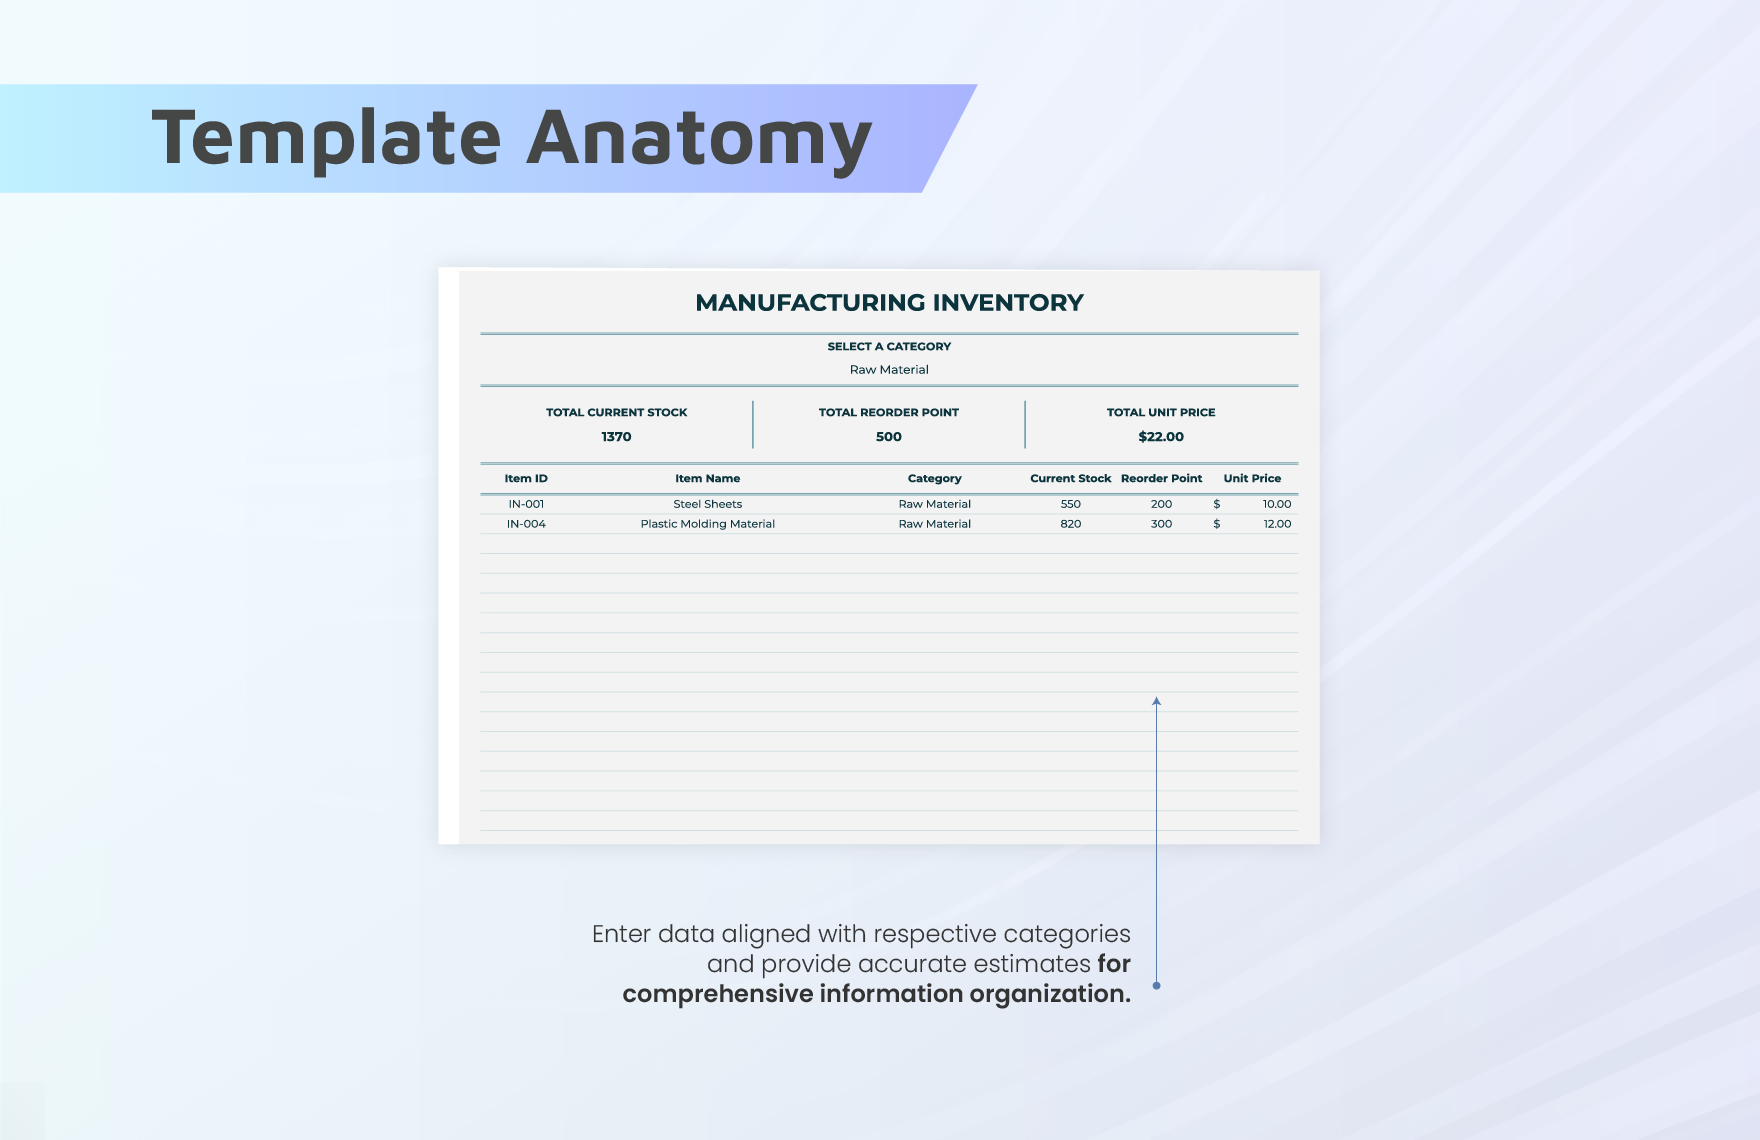 Manufacturing Inventory Template